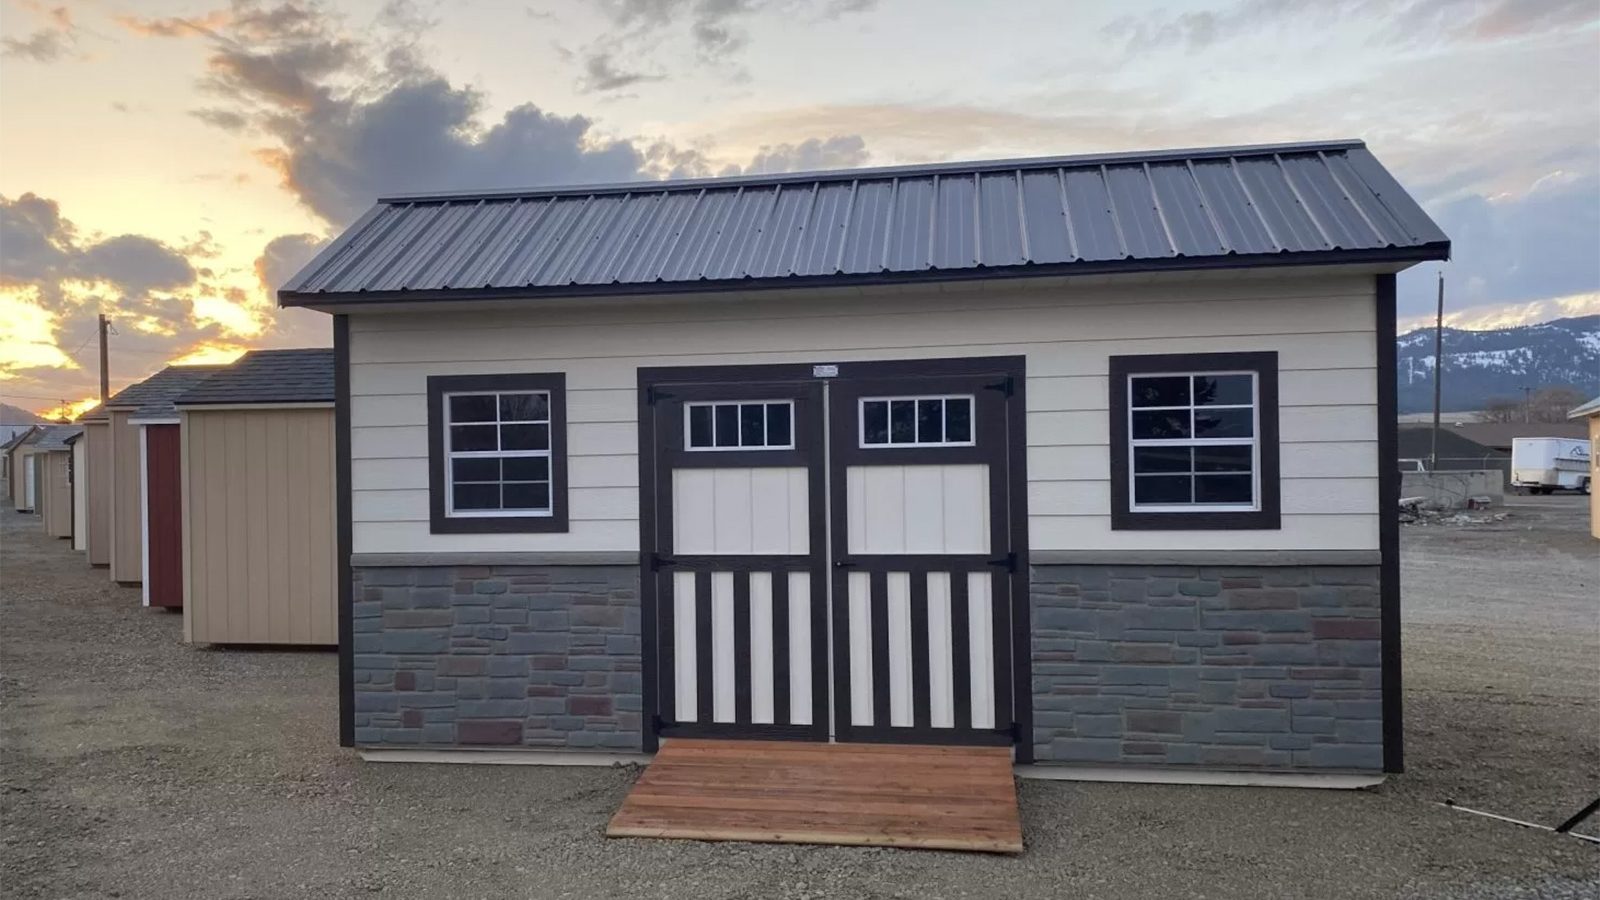 10x16 sheds for sale in oregon